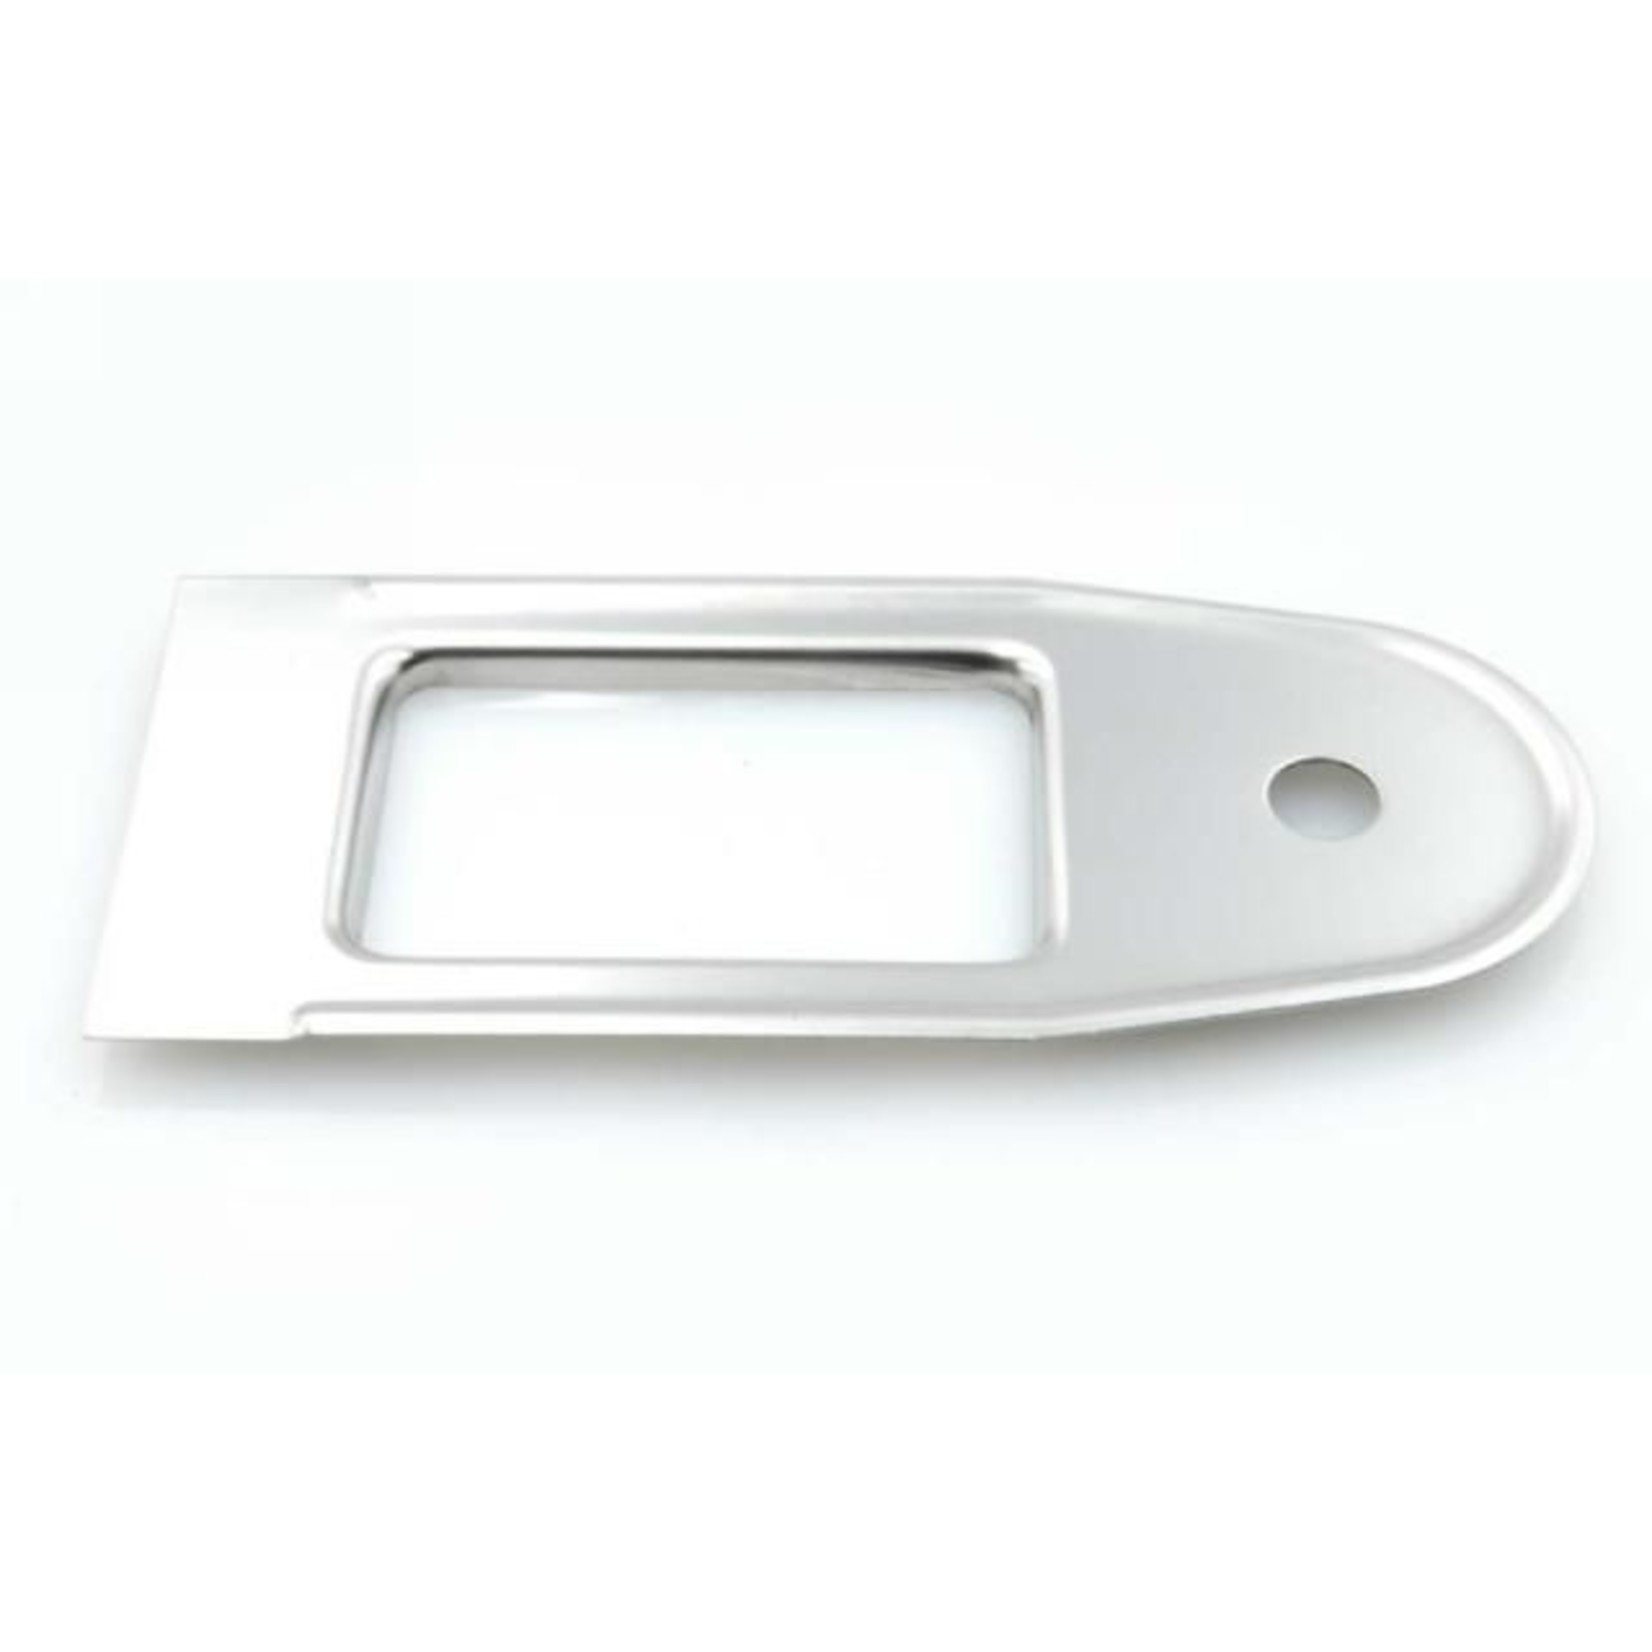 Check plate passage rear door Stainless steel Nr Org: D84260